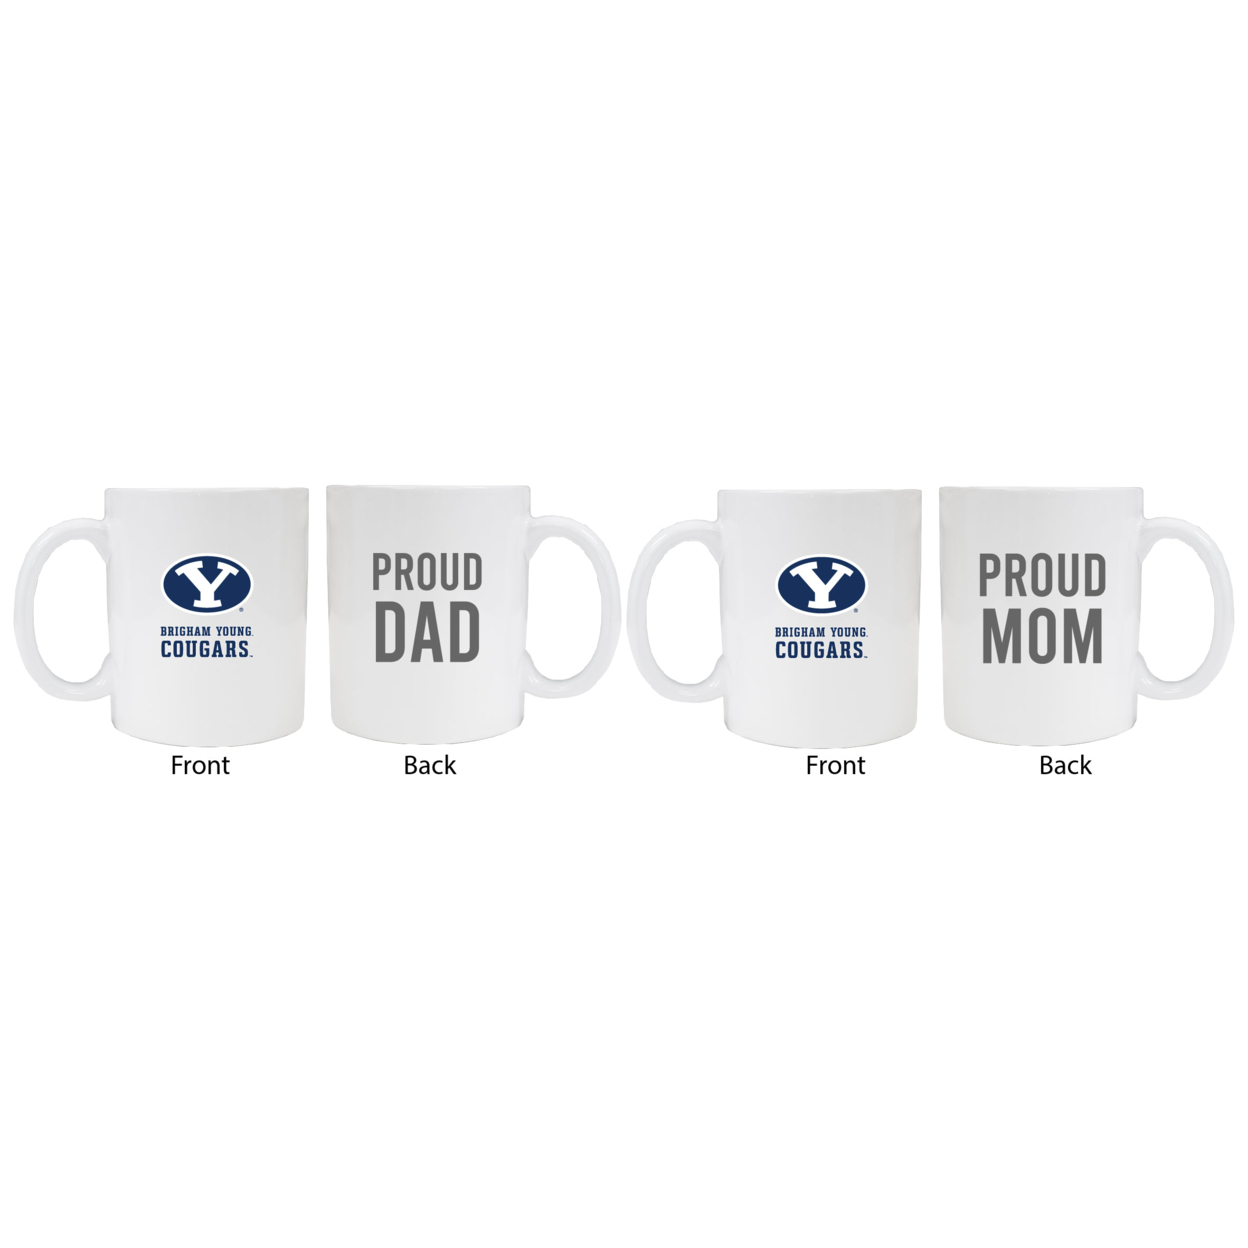 Brigham Young Cougars Proud Mom And Dad White Ceramic Coffee Mug 2 Pack (White).